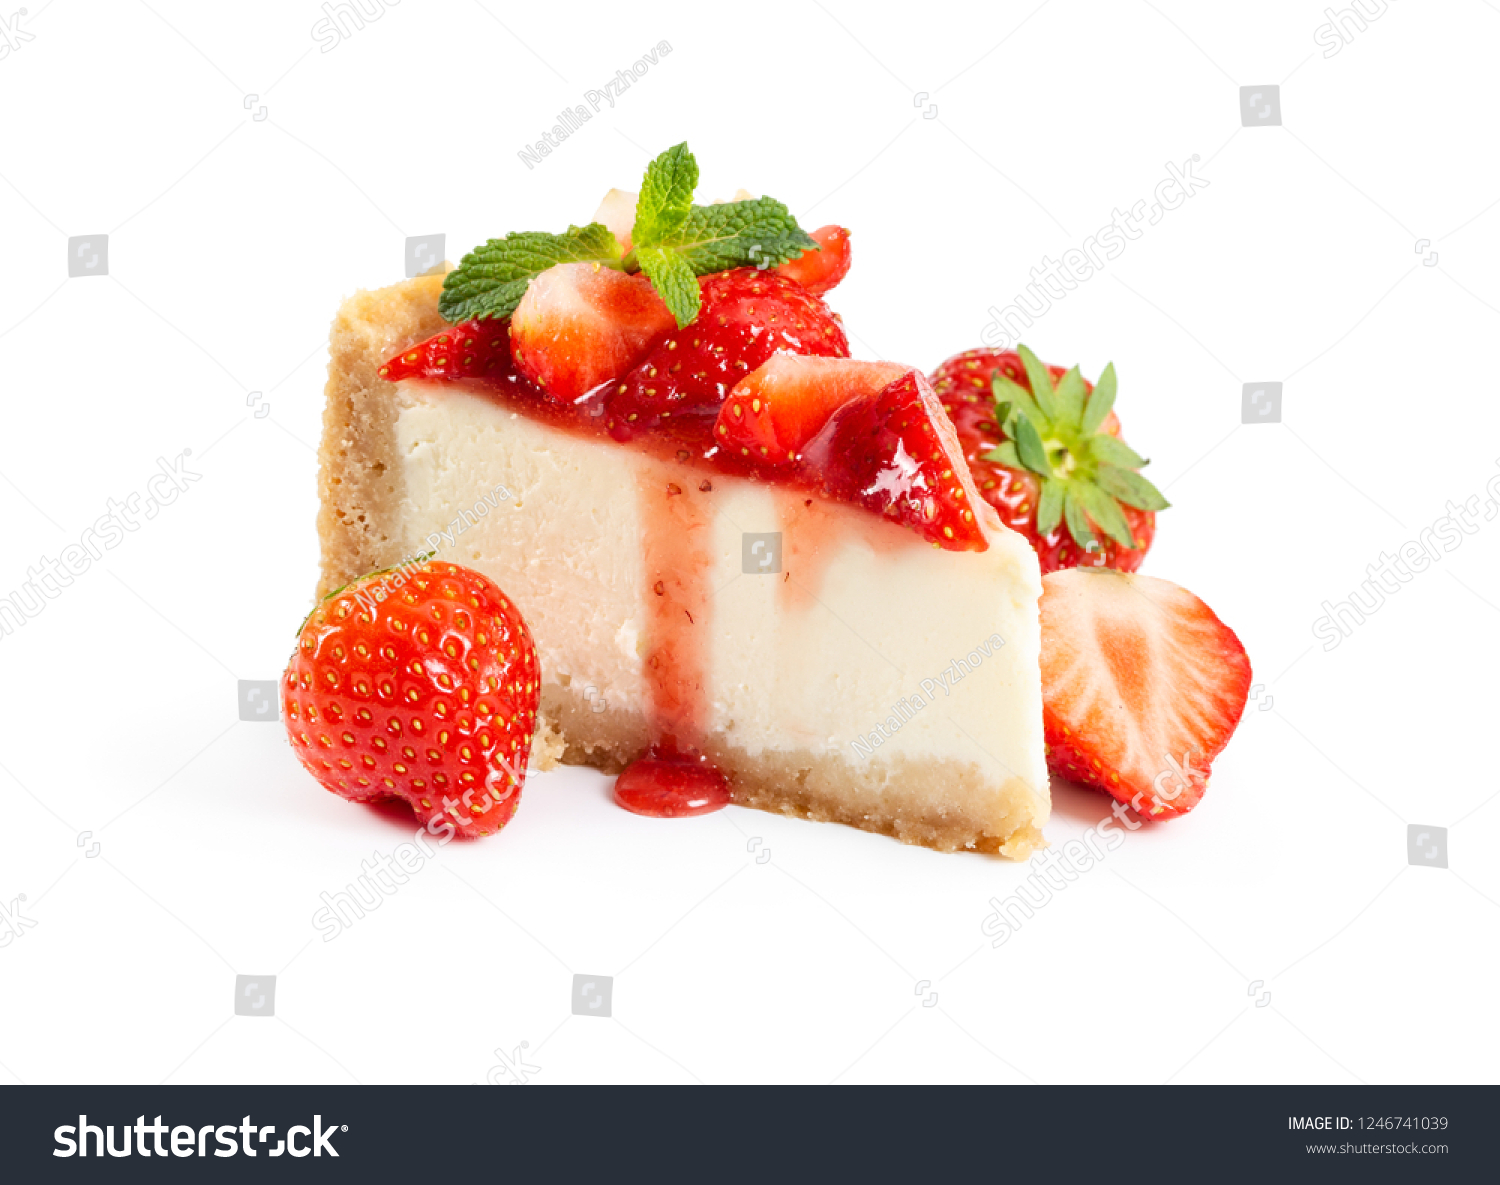 Piece of cheesecake with fresh strawberries and mint isolated on white background #1246741039